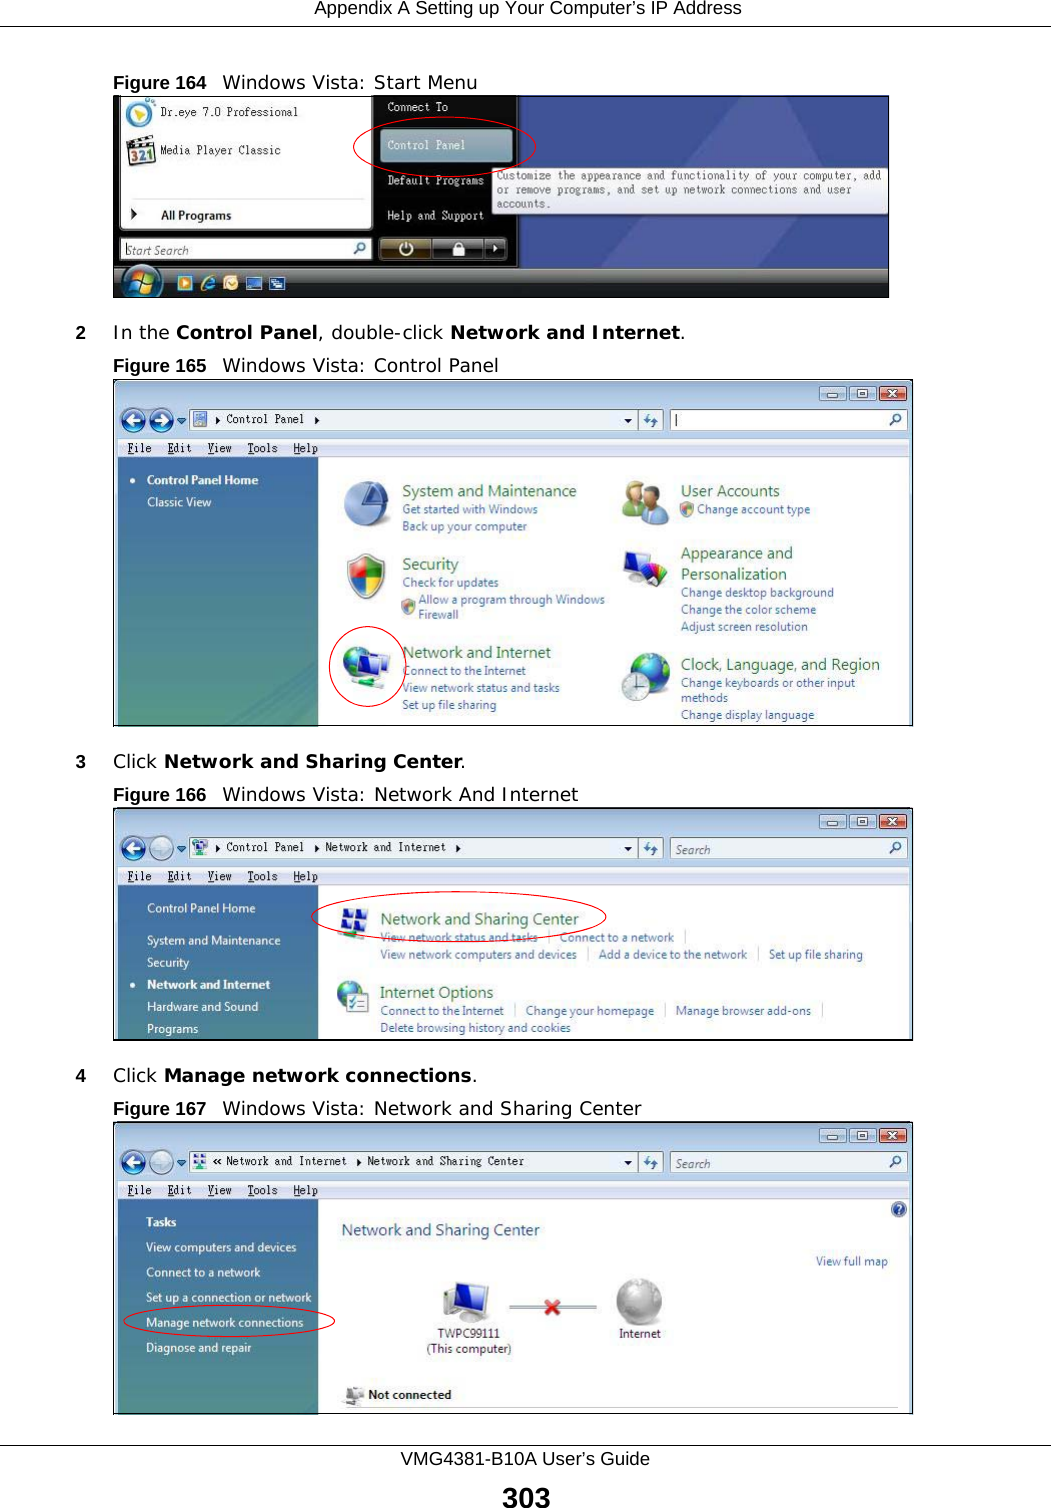  Appendix A Setting up Your Computer’s IP AddressVMG4381-B10A User’s Guide303Figure 164   Windows Vista: Start Menu2In the Control Panel, double-click Network and Internet.Figure 165   Windows Vista: Control Panel3Click Network and Sharing Center.Figure 166   Windows Vista: Network And Internet4Click Manage network connections.Figure 167   Windows Vista: Network and Sharing Center